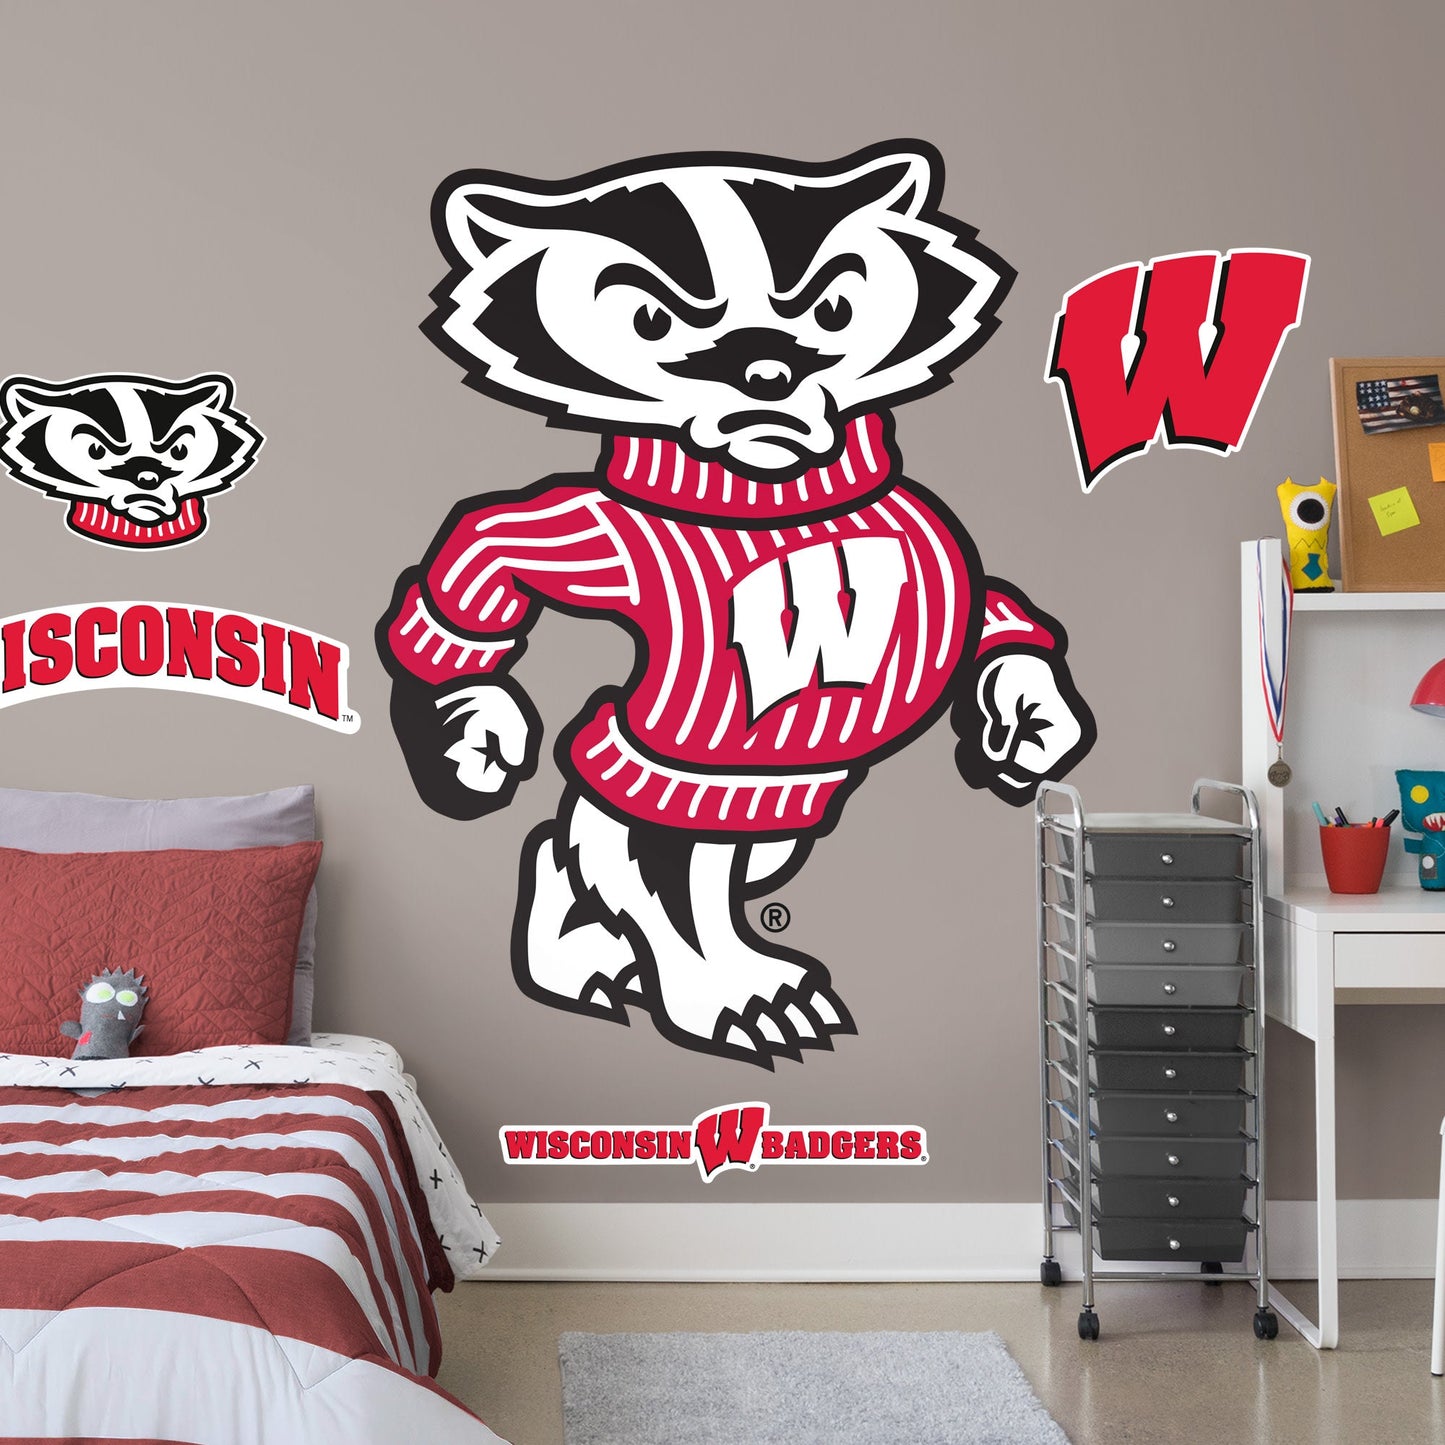 Wisconsin Badgers: Bucky Badger Illustrated Mascot - Officially Licensed Removable Wall Decal